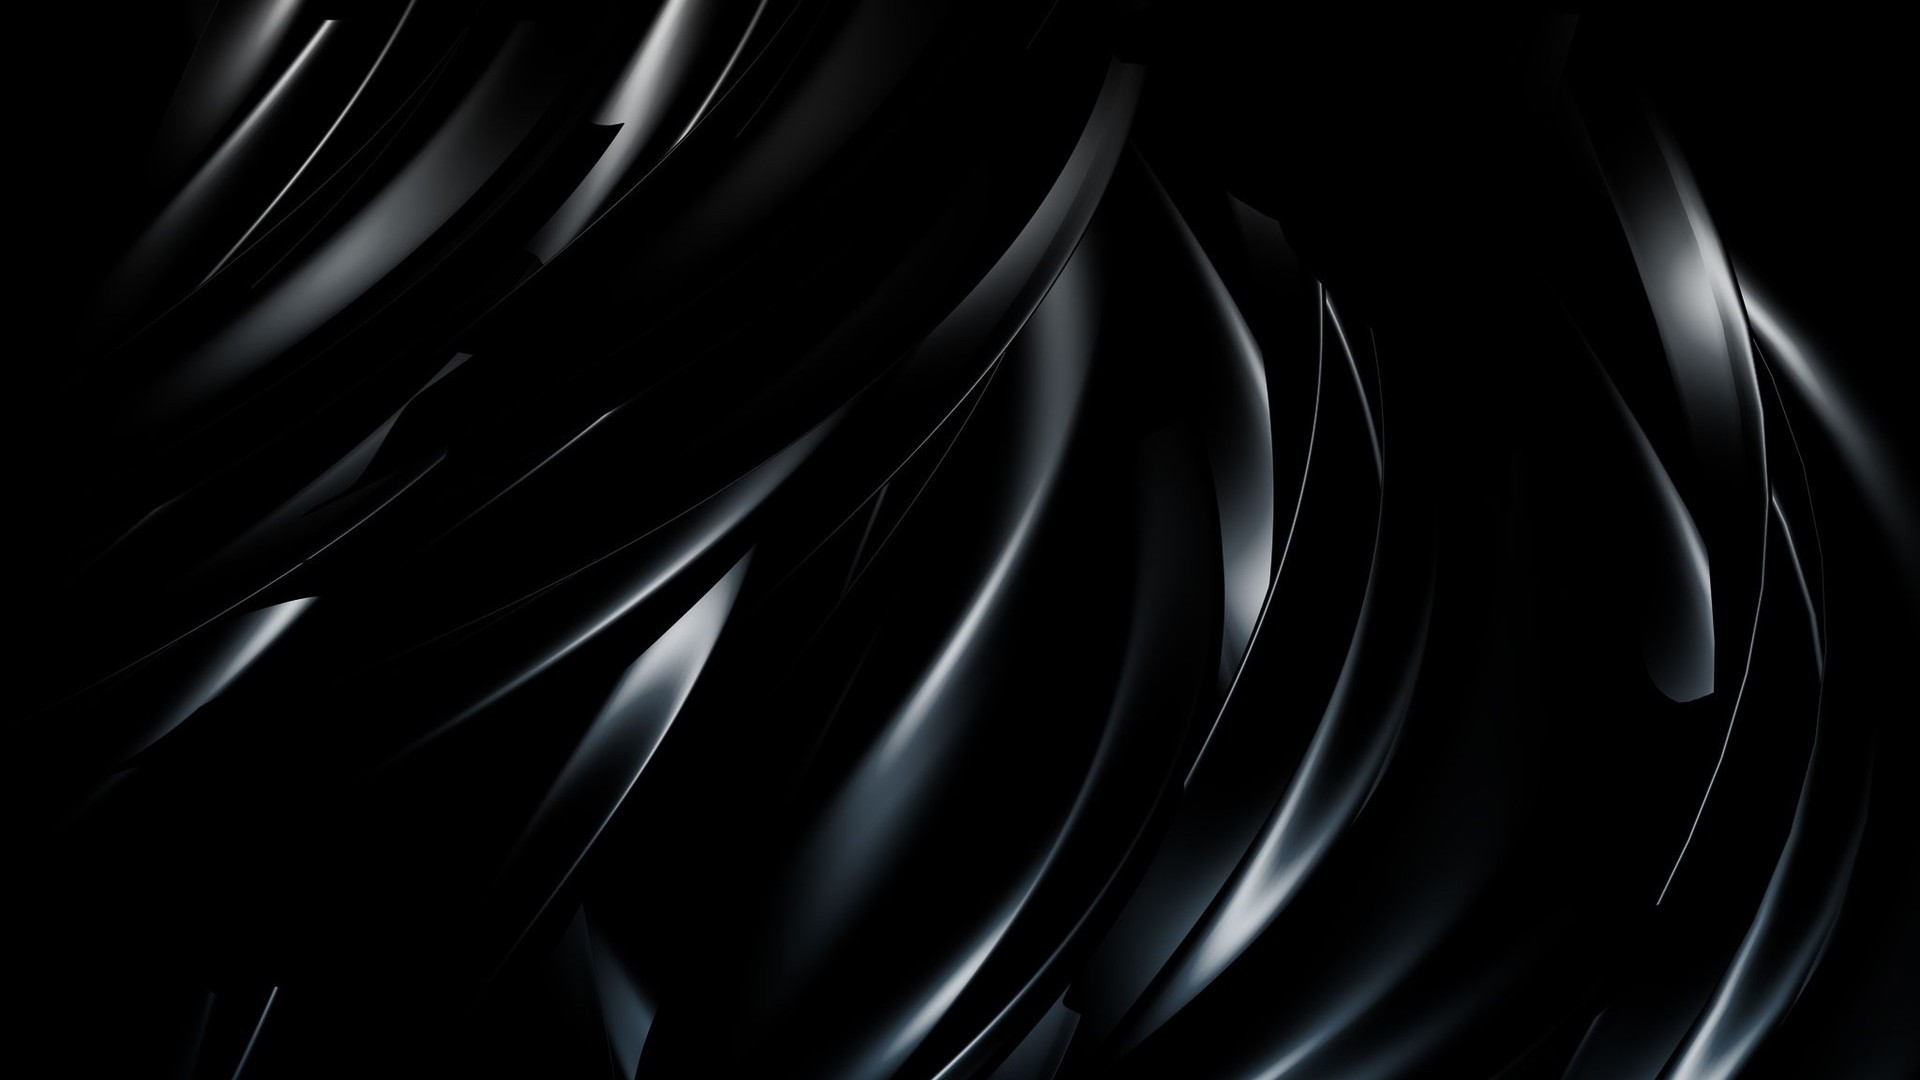 Dark Abstract Music Image Amp Pictures Becuo